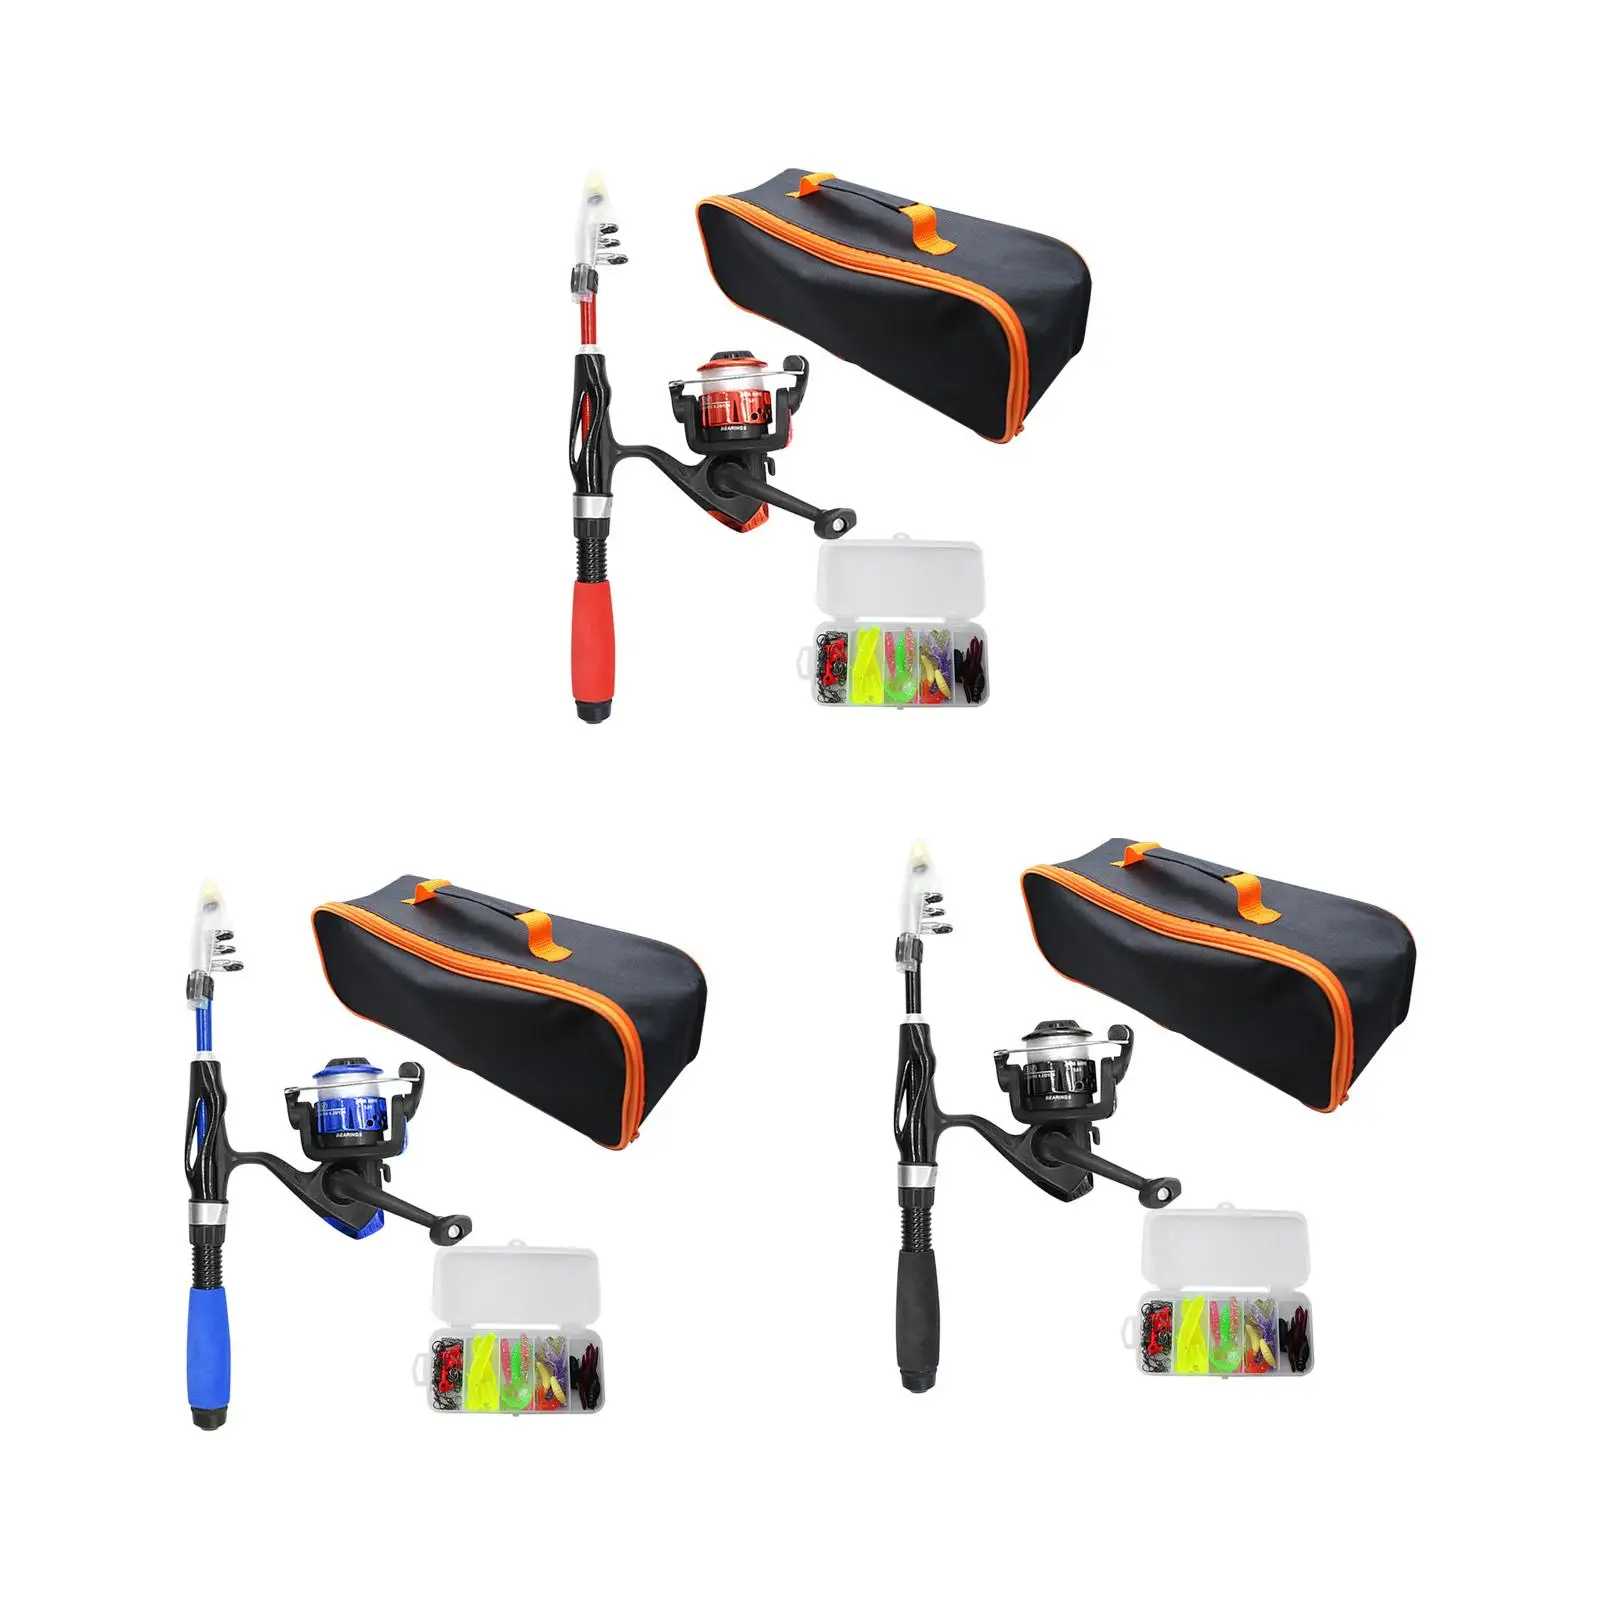 Fishing Pole Children Starter Kits Child Fishing Rod Complete Set with Lures